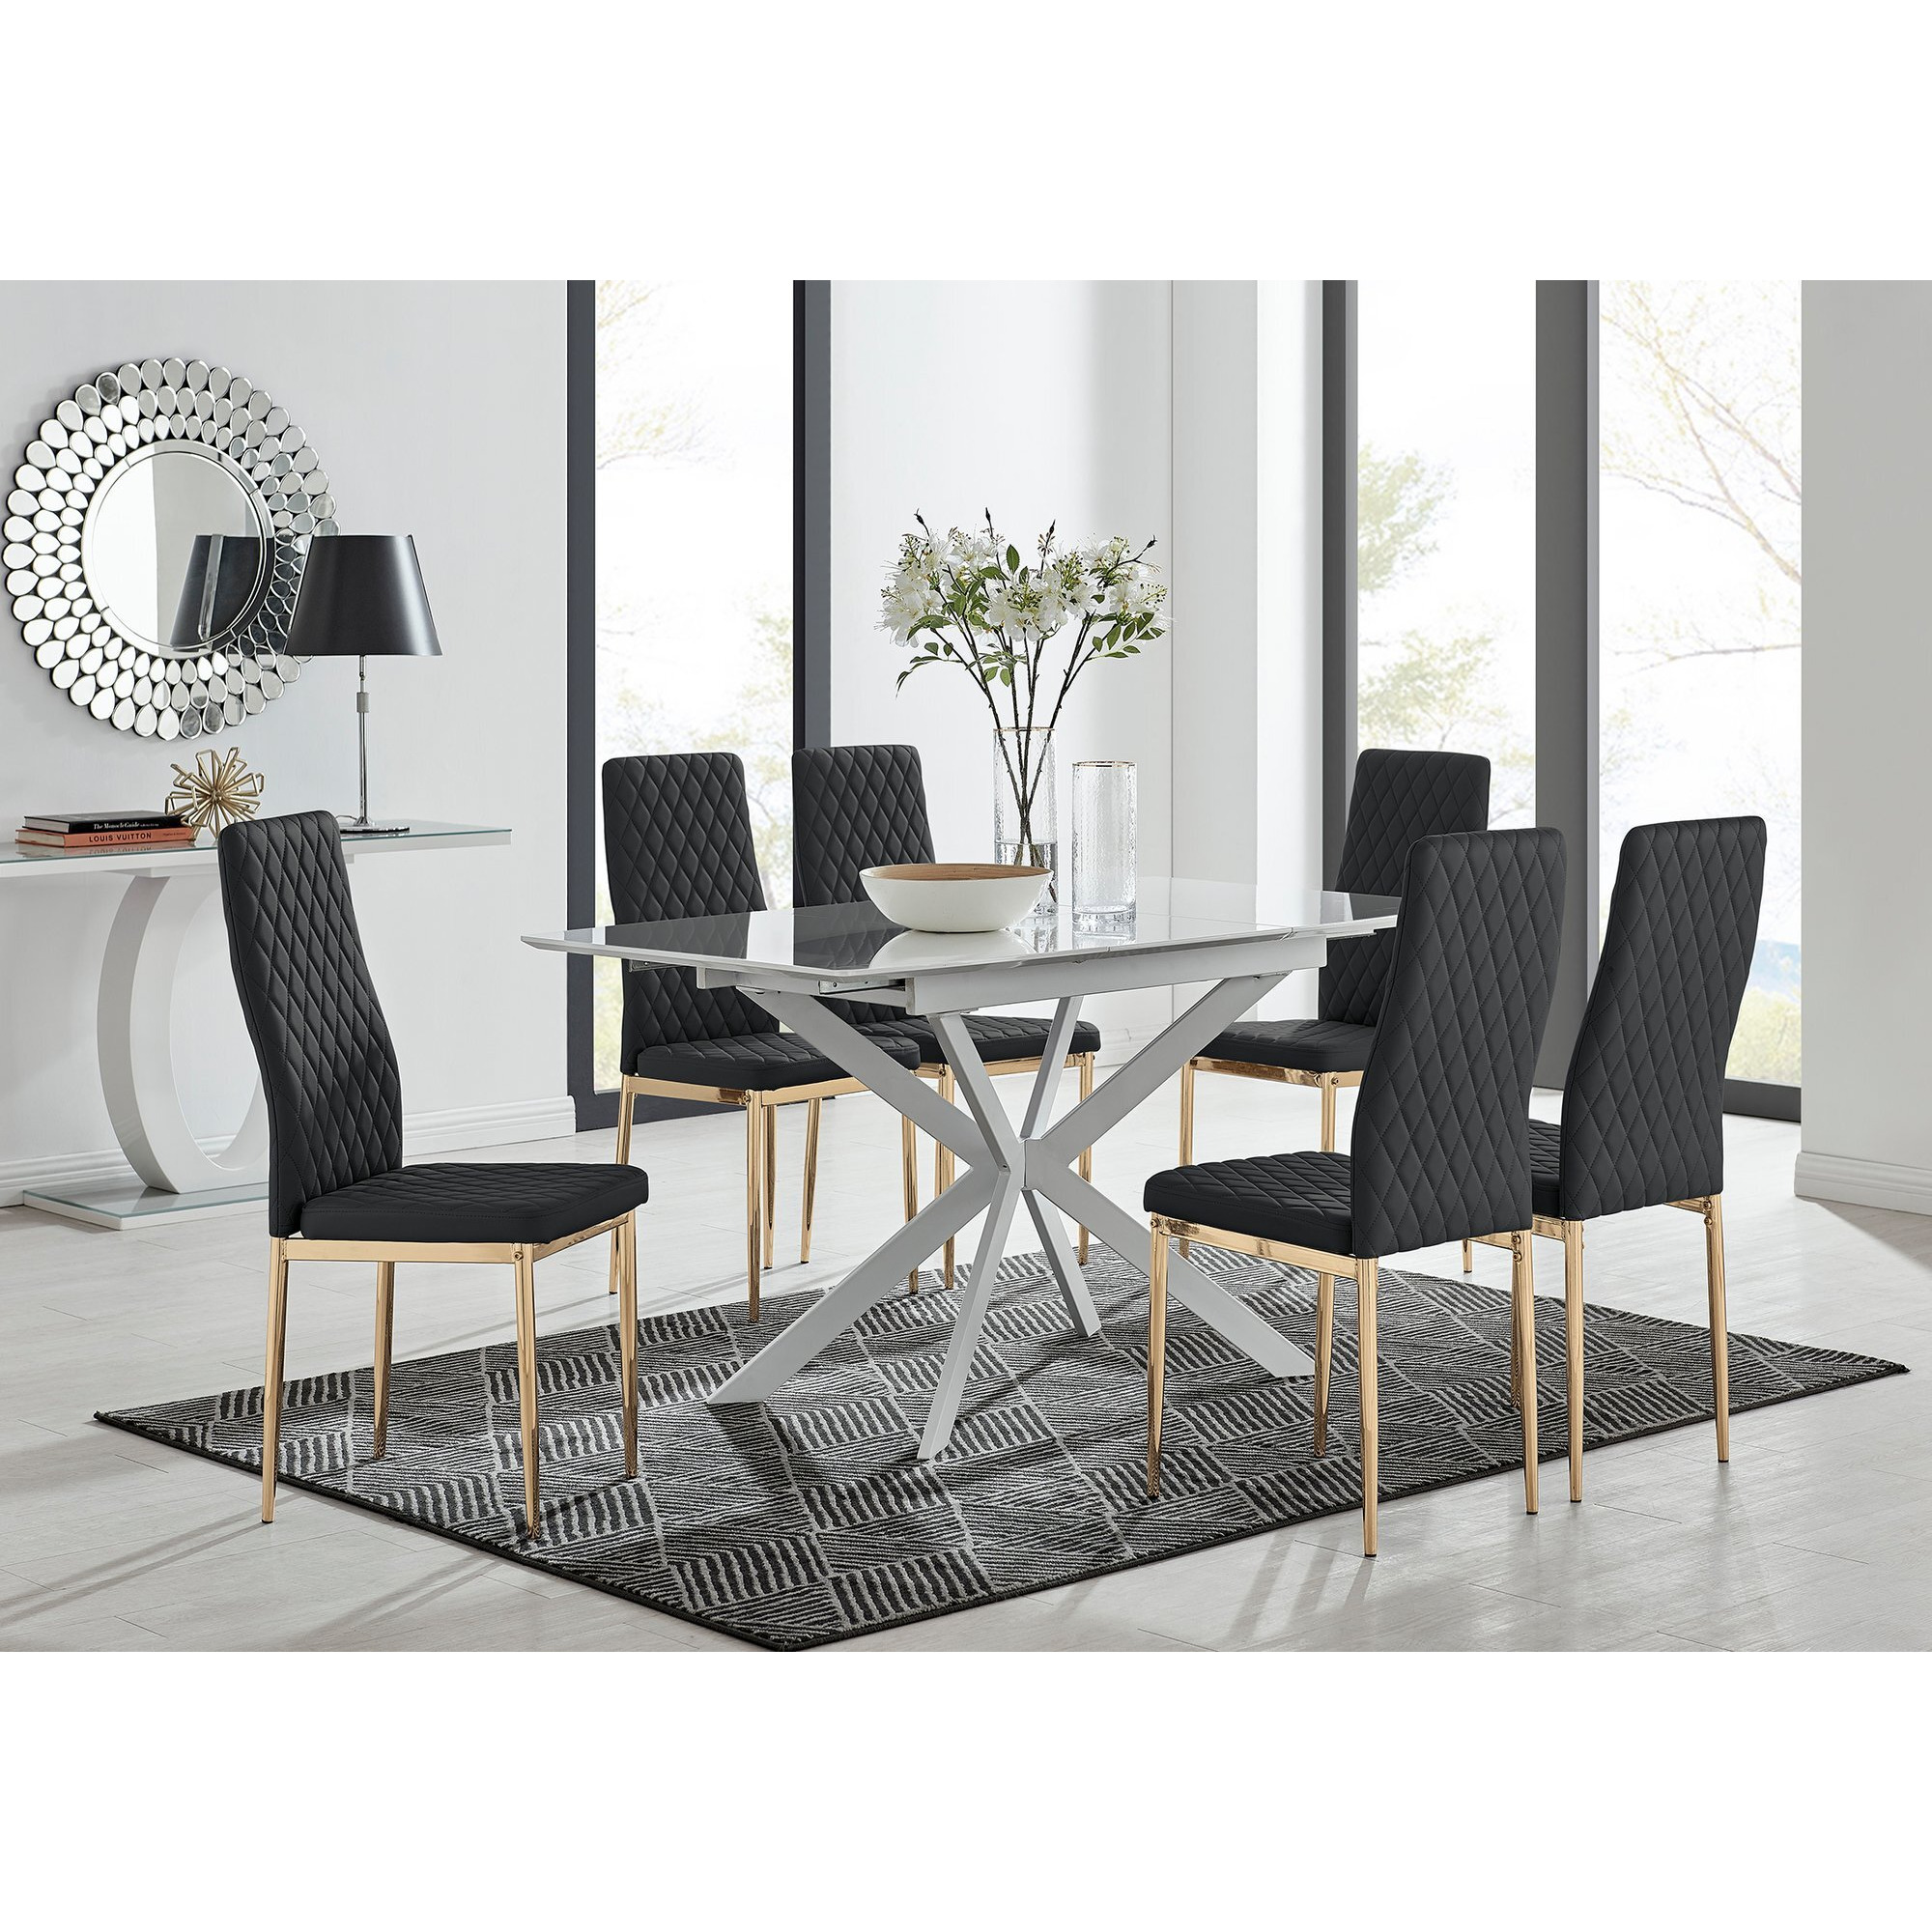 Lira 120 Extending Dining Table and 6 Milan Gold Leg Chairs